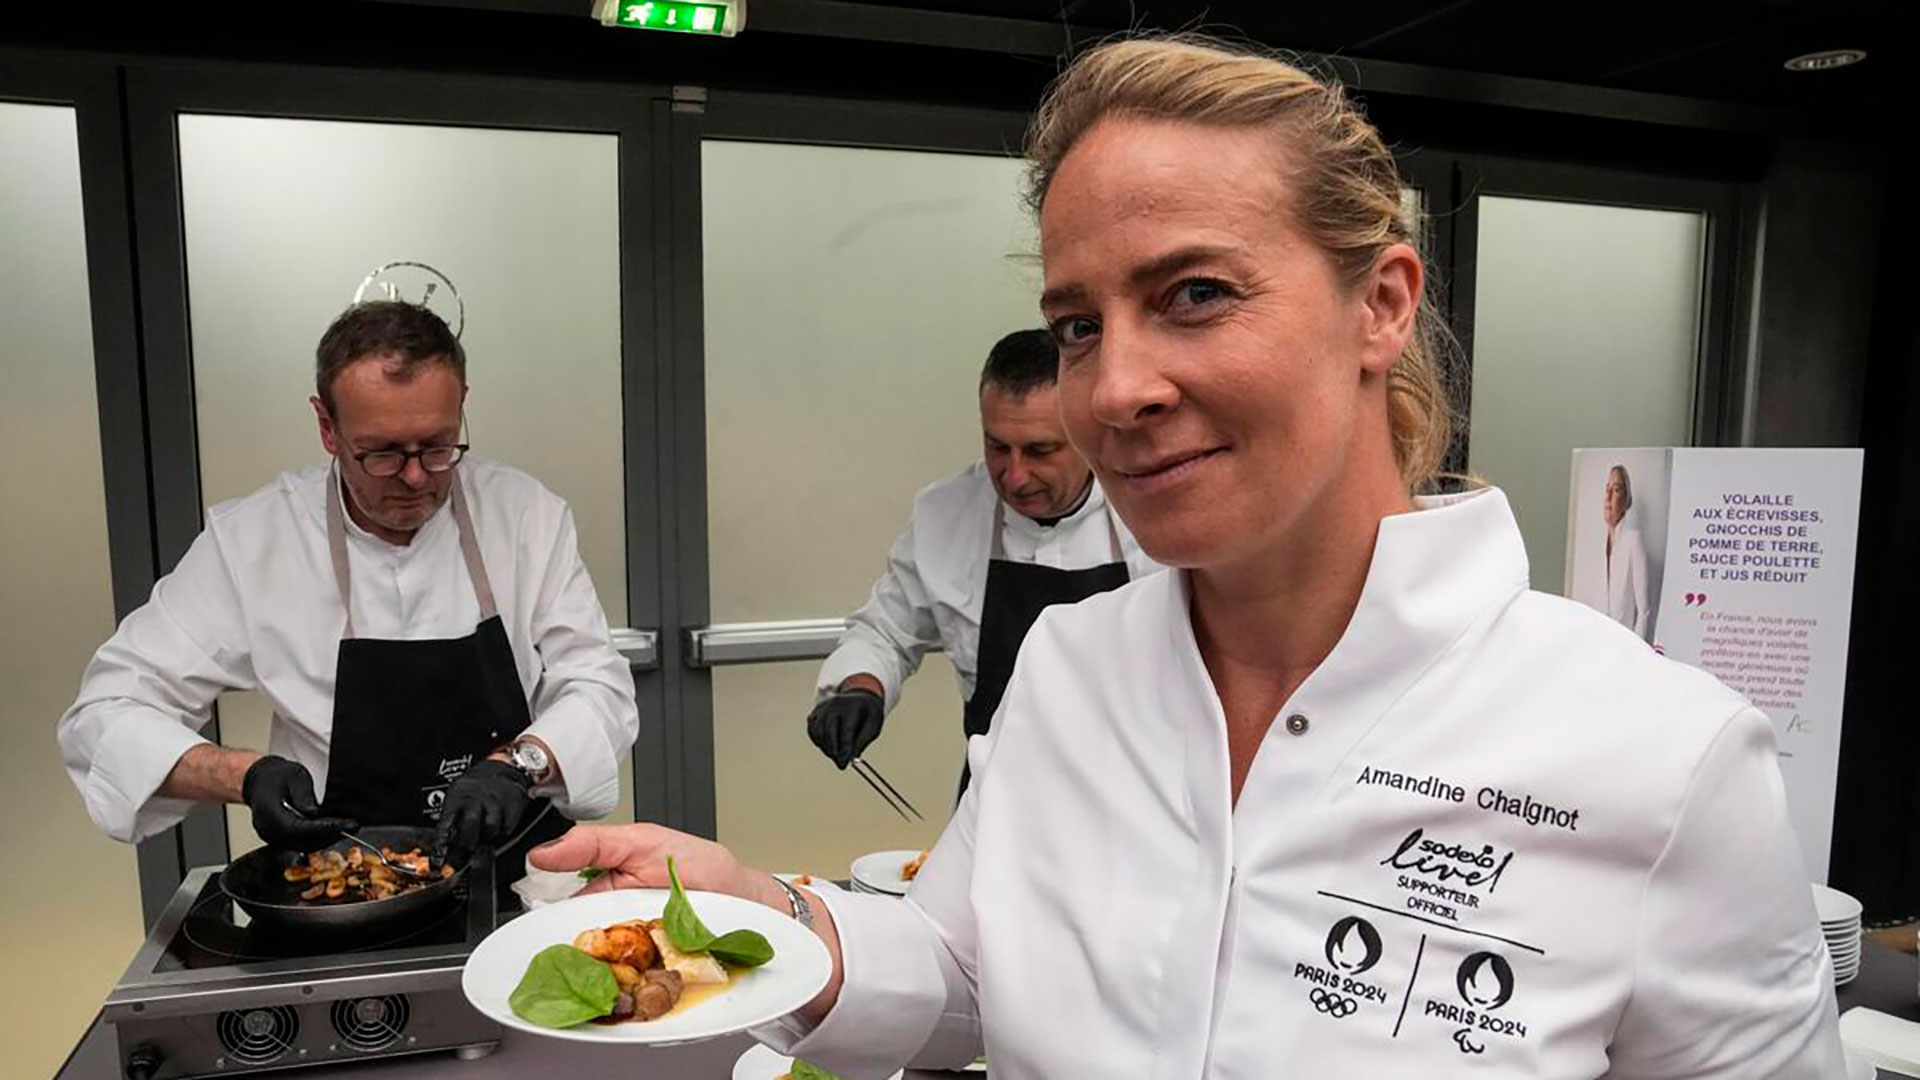 Paris 2024 is also preparing to offer an unprecedented gourmet experience